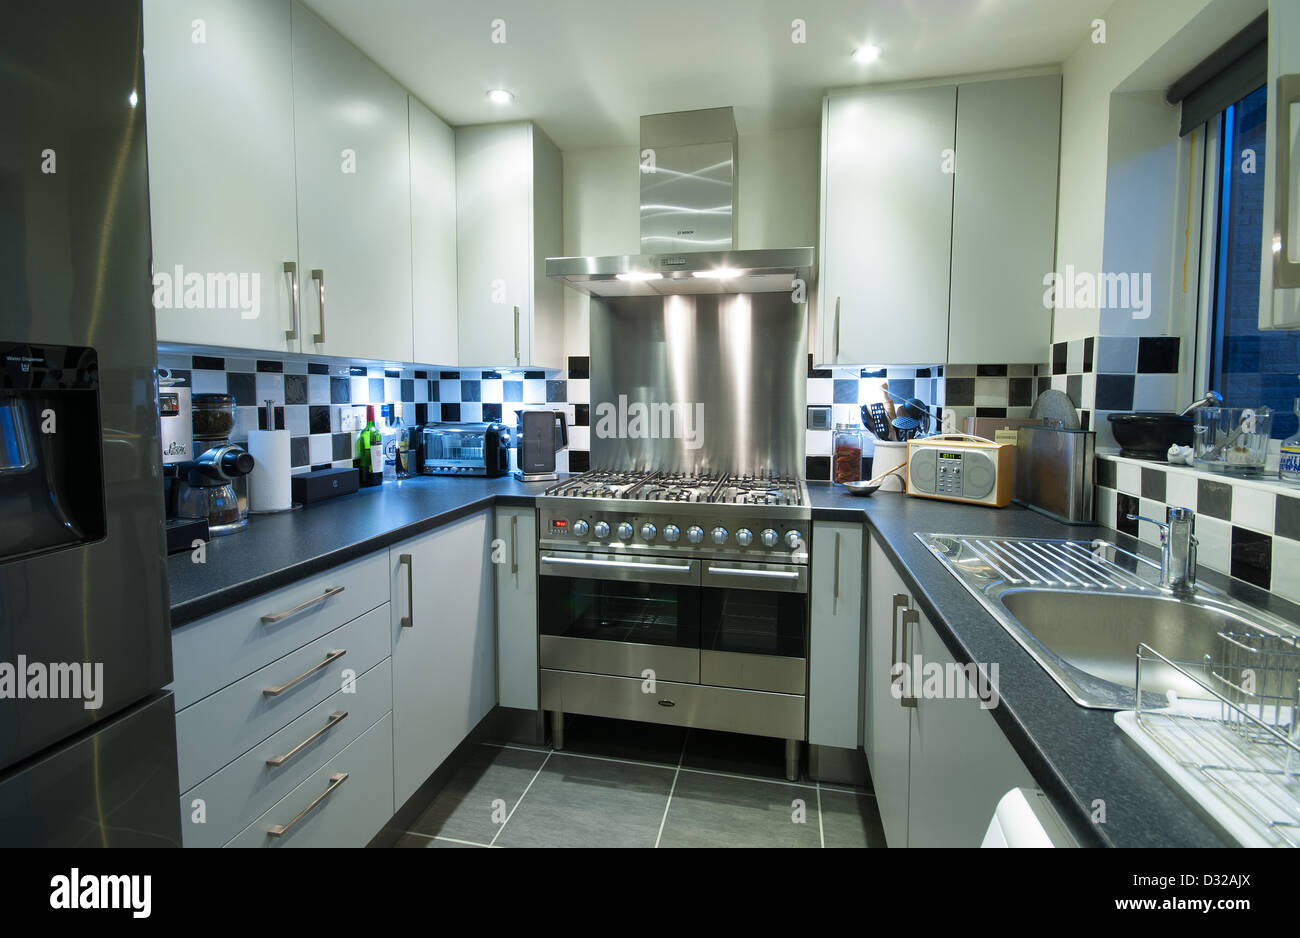 A small, modern domestic kitchen with a range cooker and lots of storage space. UK, 2013. Stock Photo